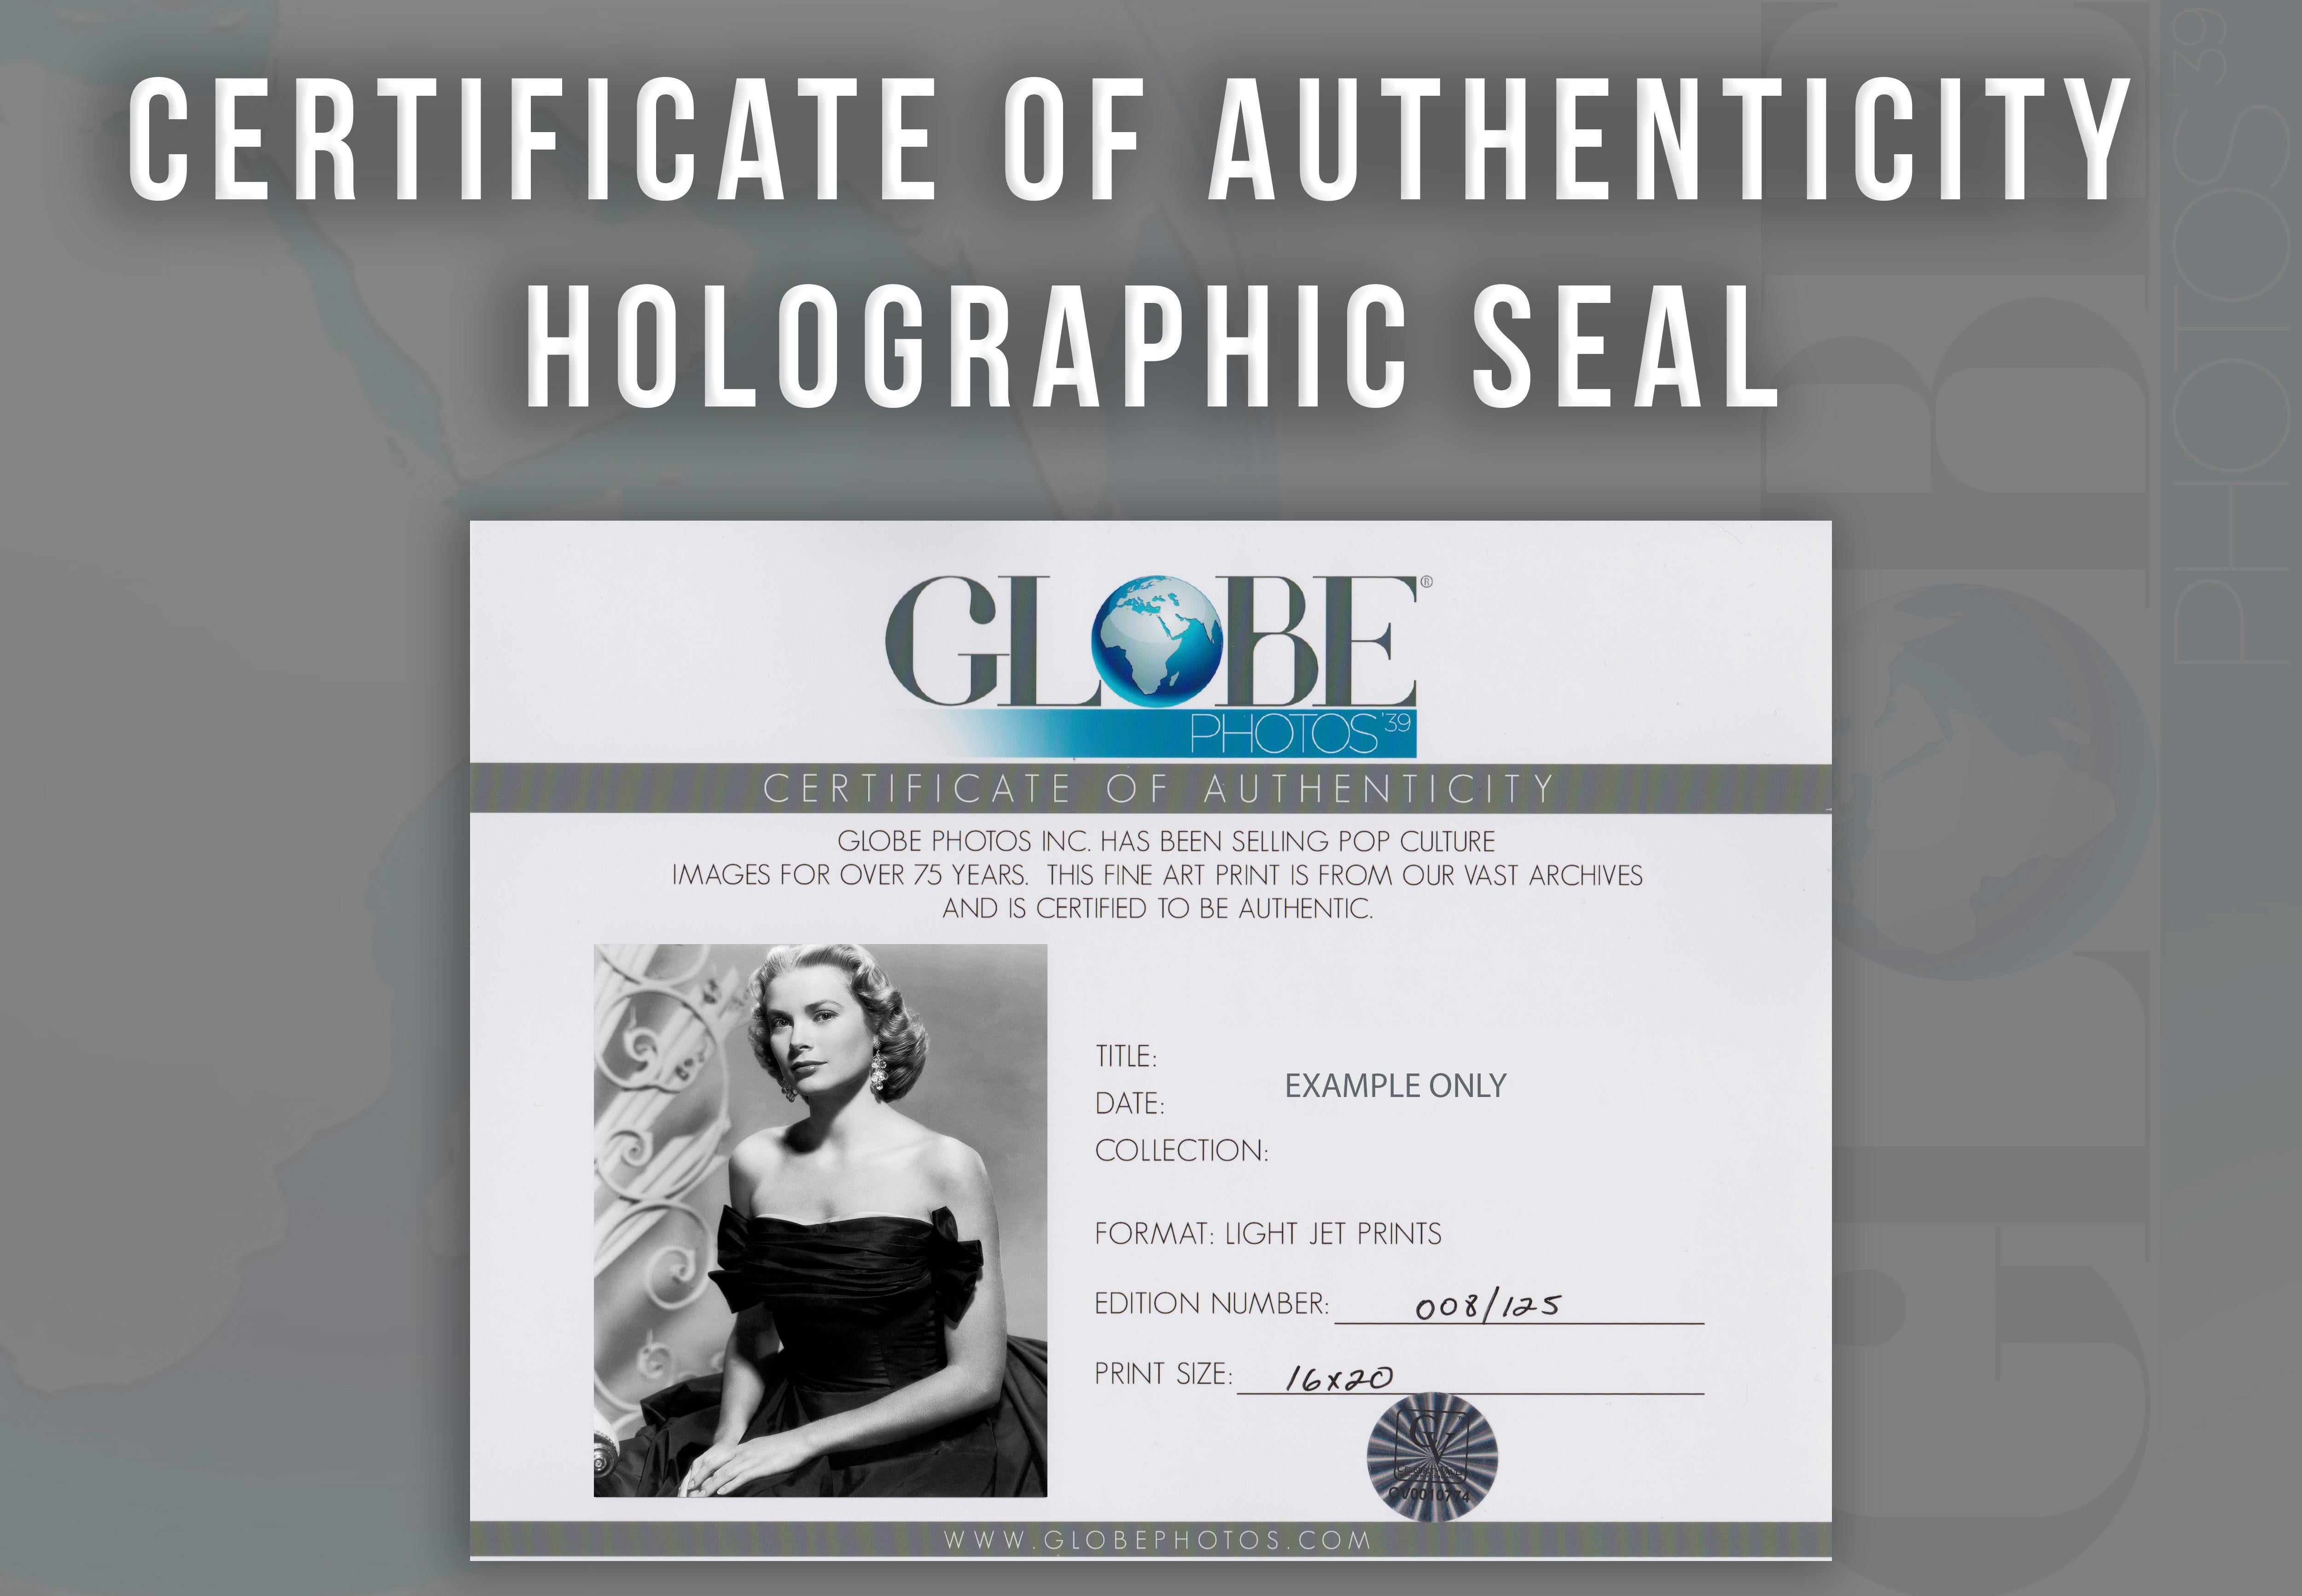 This classical black and white glamour portrait features Grace Kelly posed looking ot the camera, donned in diamond jewelry.

Grace Kelly was an American film actress who after starring in several significant films in the early- to mid-1950s became